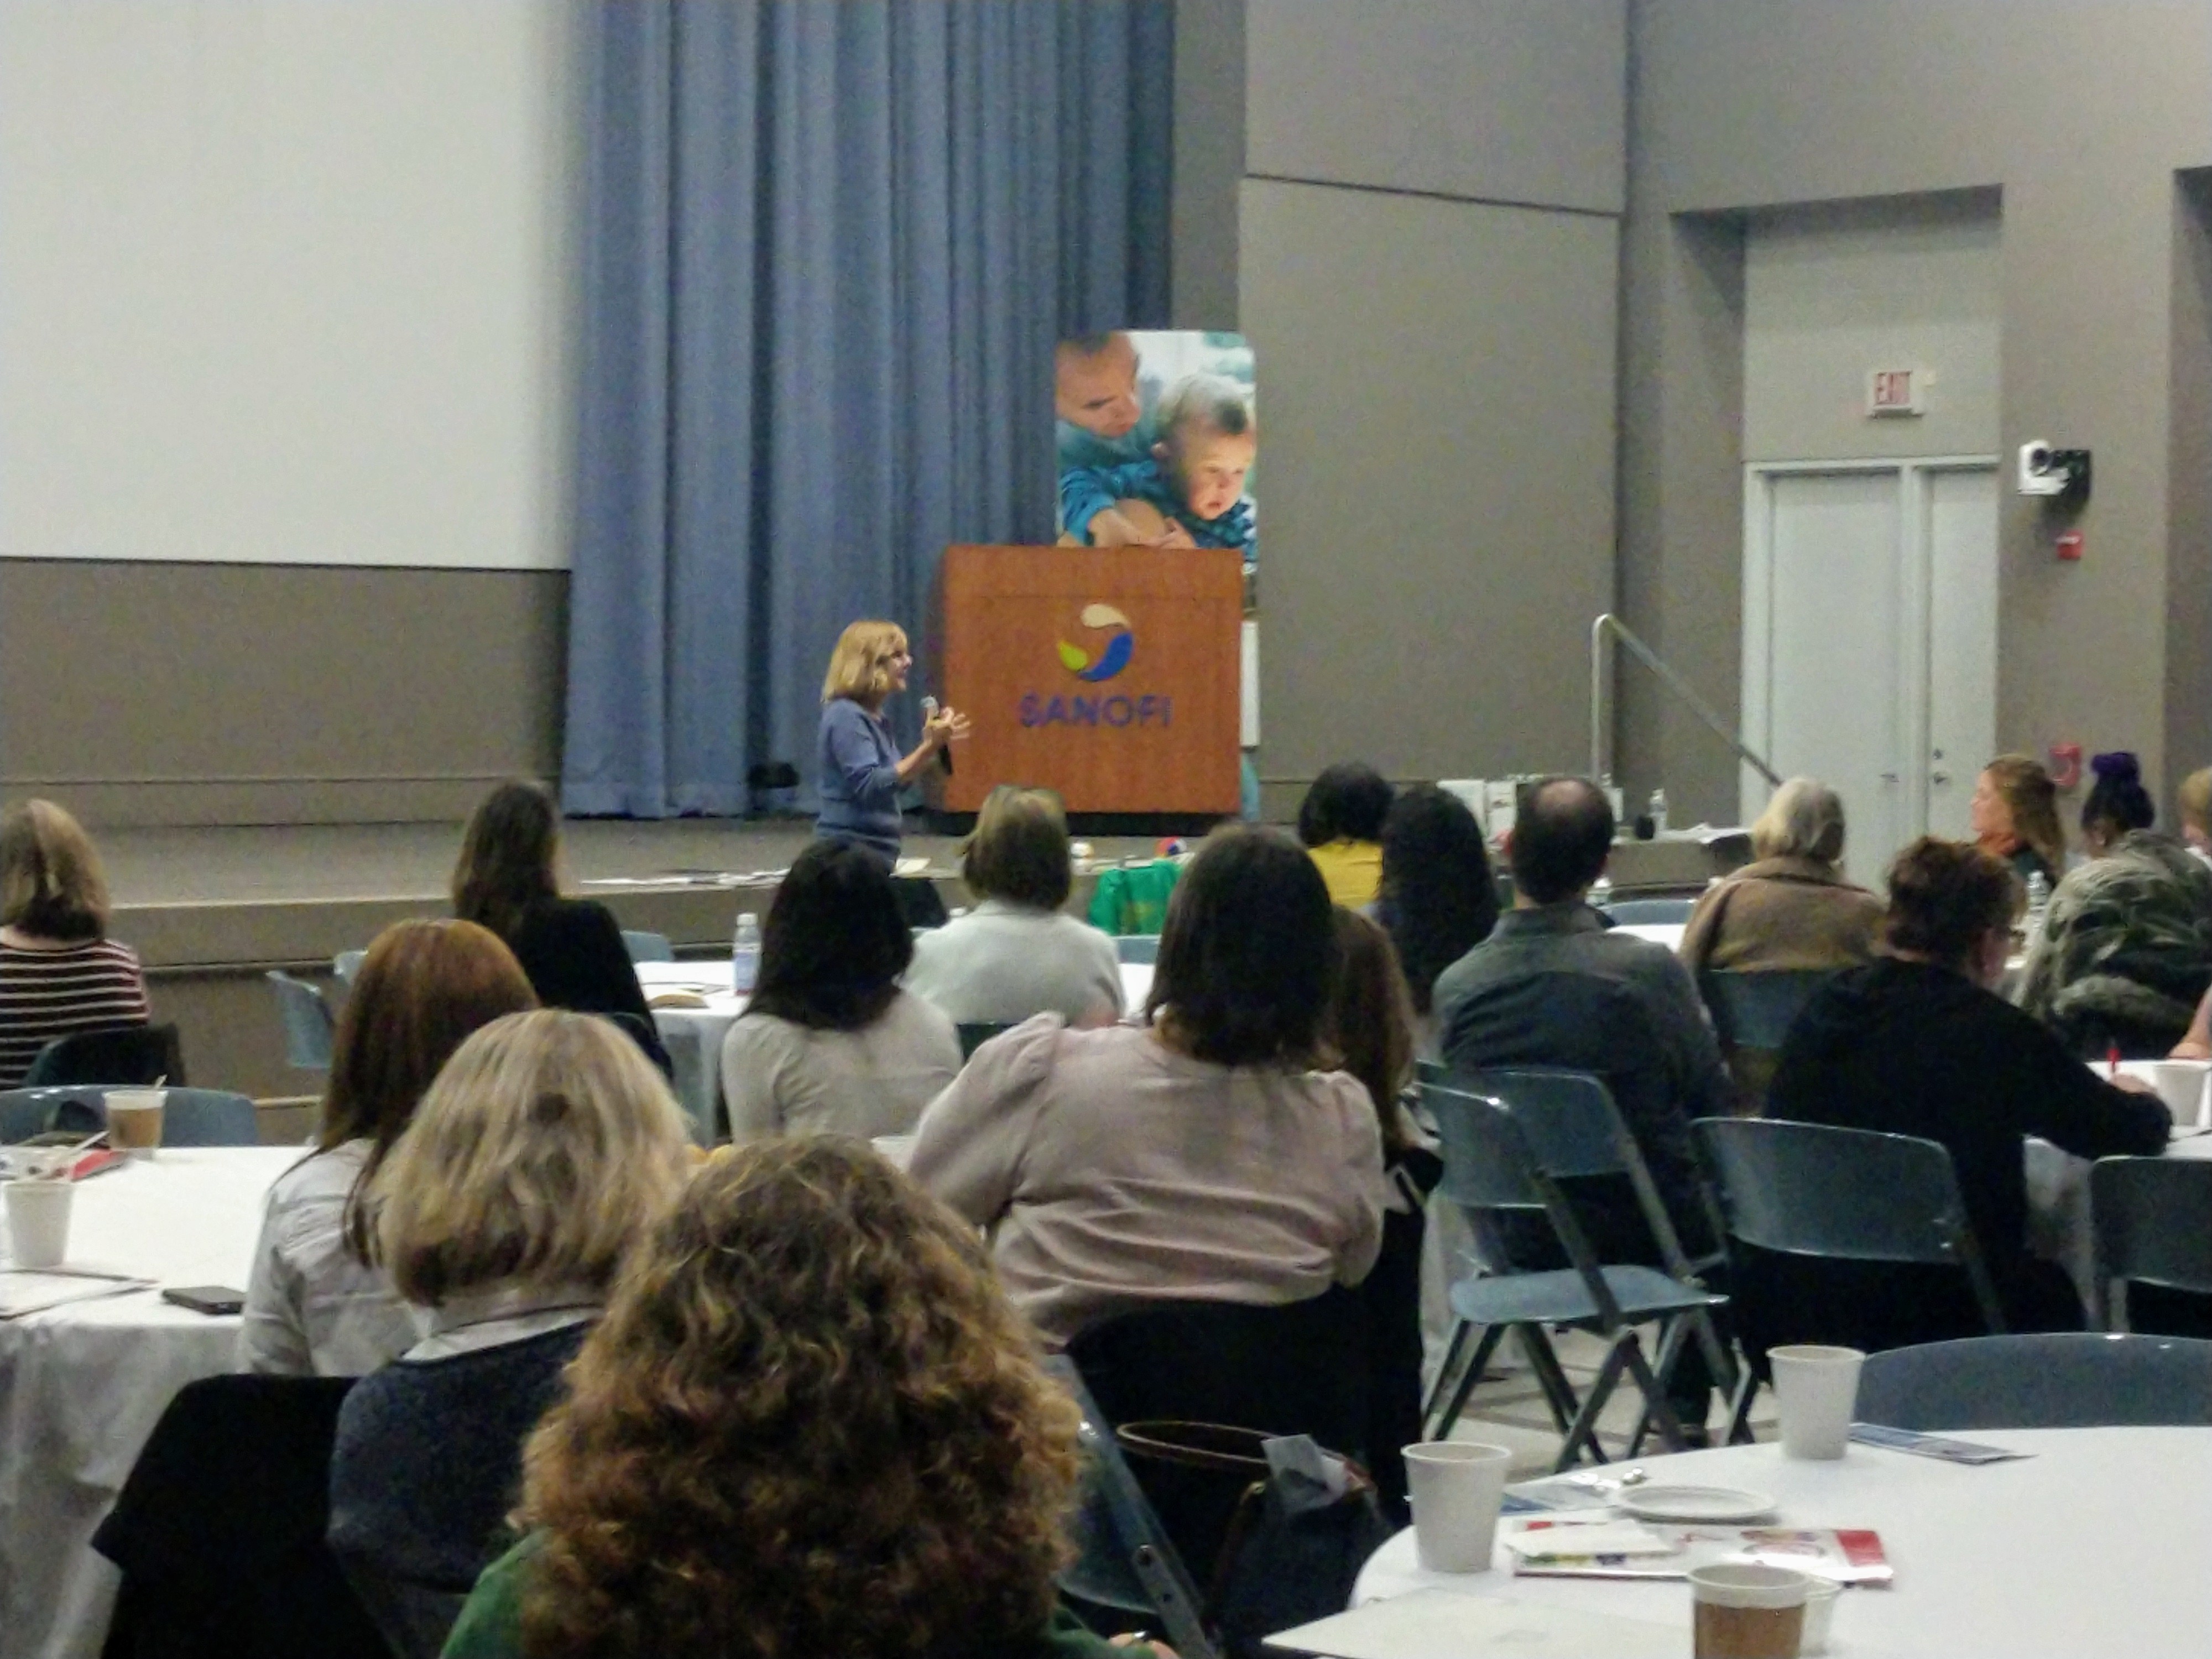 Lisa Athan, MA, Plenary Speaker at Strengthening Our Schools conference